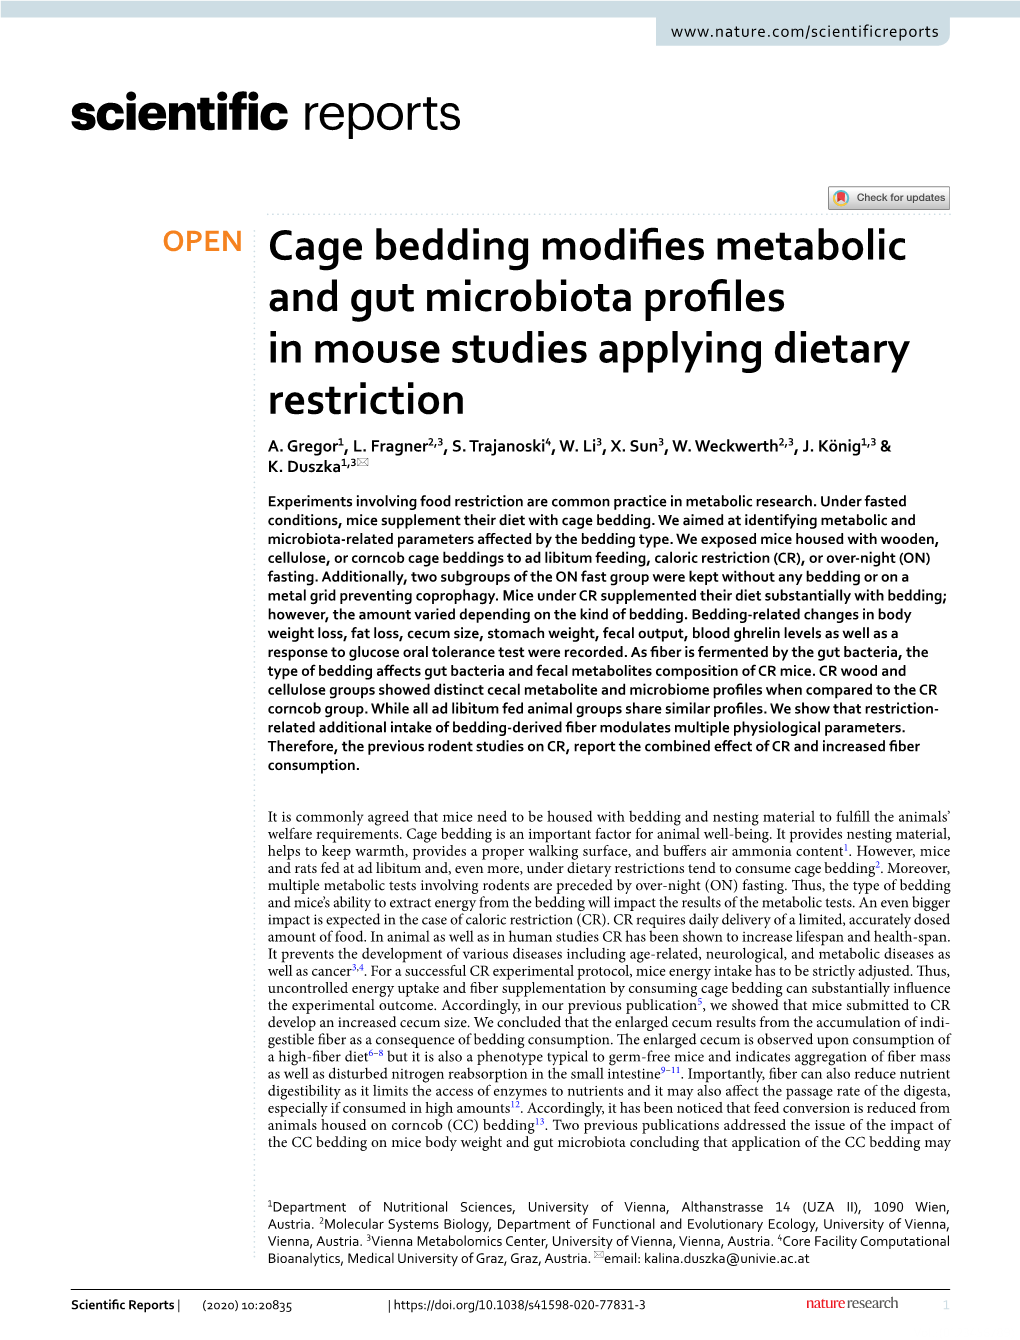 Cage Bedding Modifies Metabolic and Gut Microbiota Profiles in Mouse